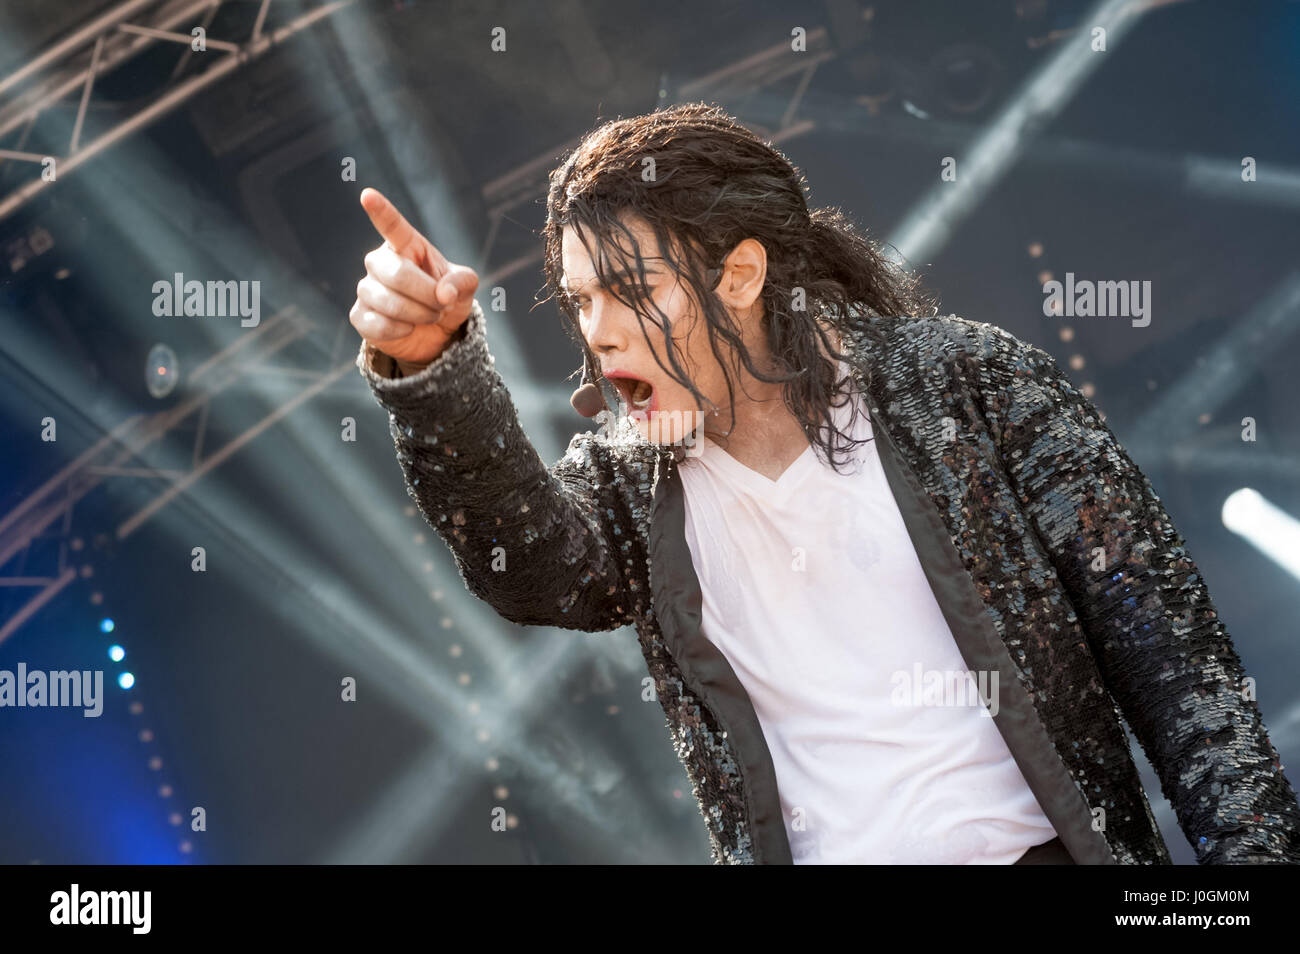 Yateley, UK - June 27, 2015: Navi, a professional Michael Jackson tribute artist and impersonator performing at the GOTG festival in Yateley, UK Stock Photo